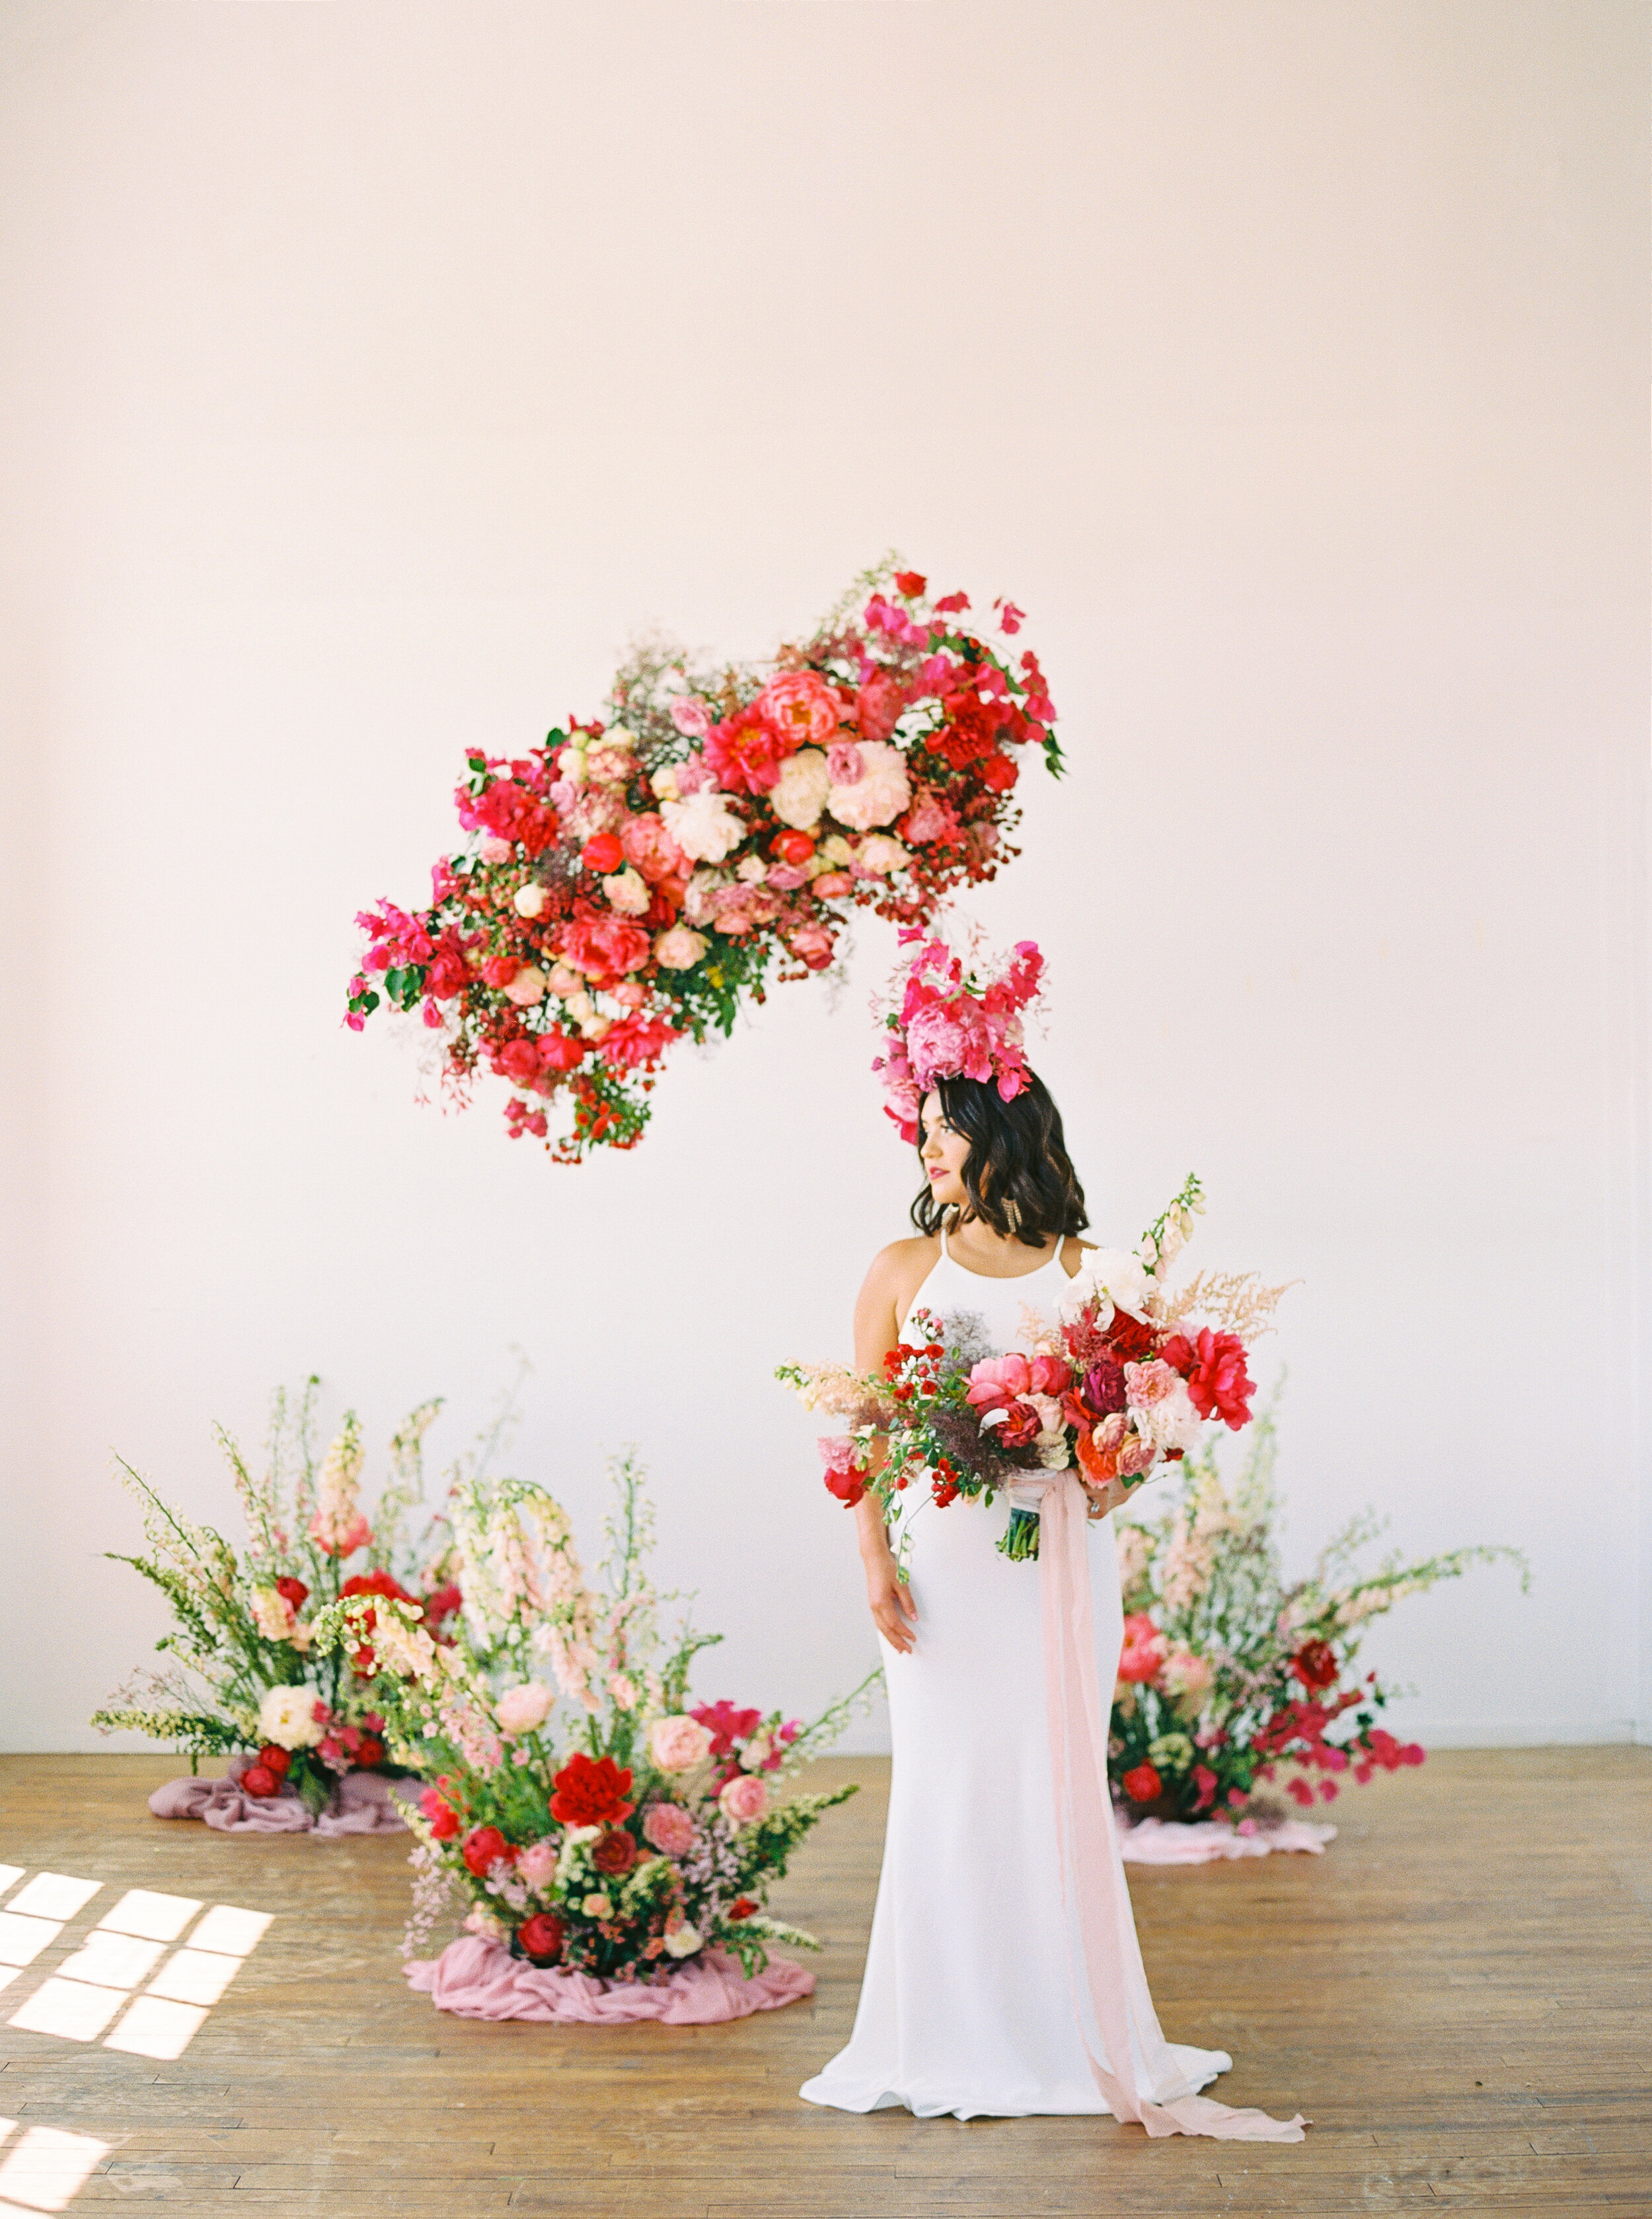 A Romantic Wedding Elopement Filled with Colorful Fuchsia - Sarahi Hadden Submission-122.jpg